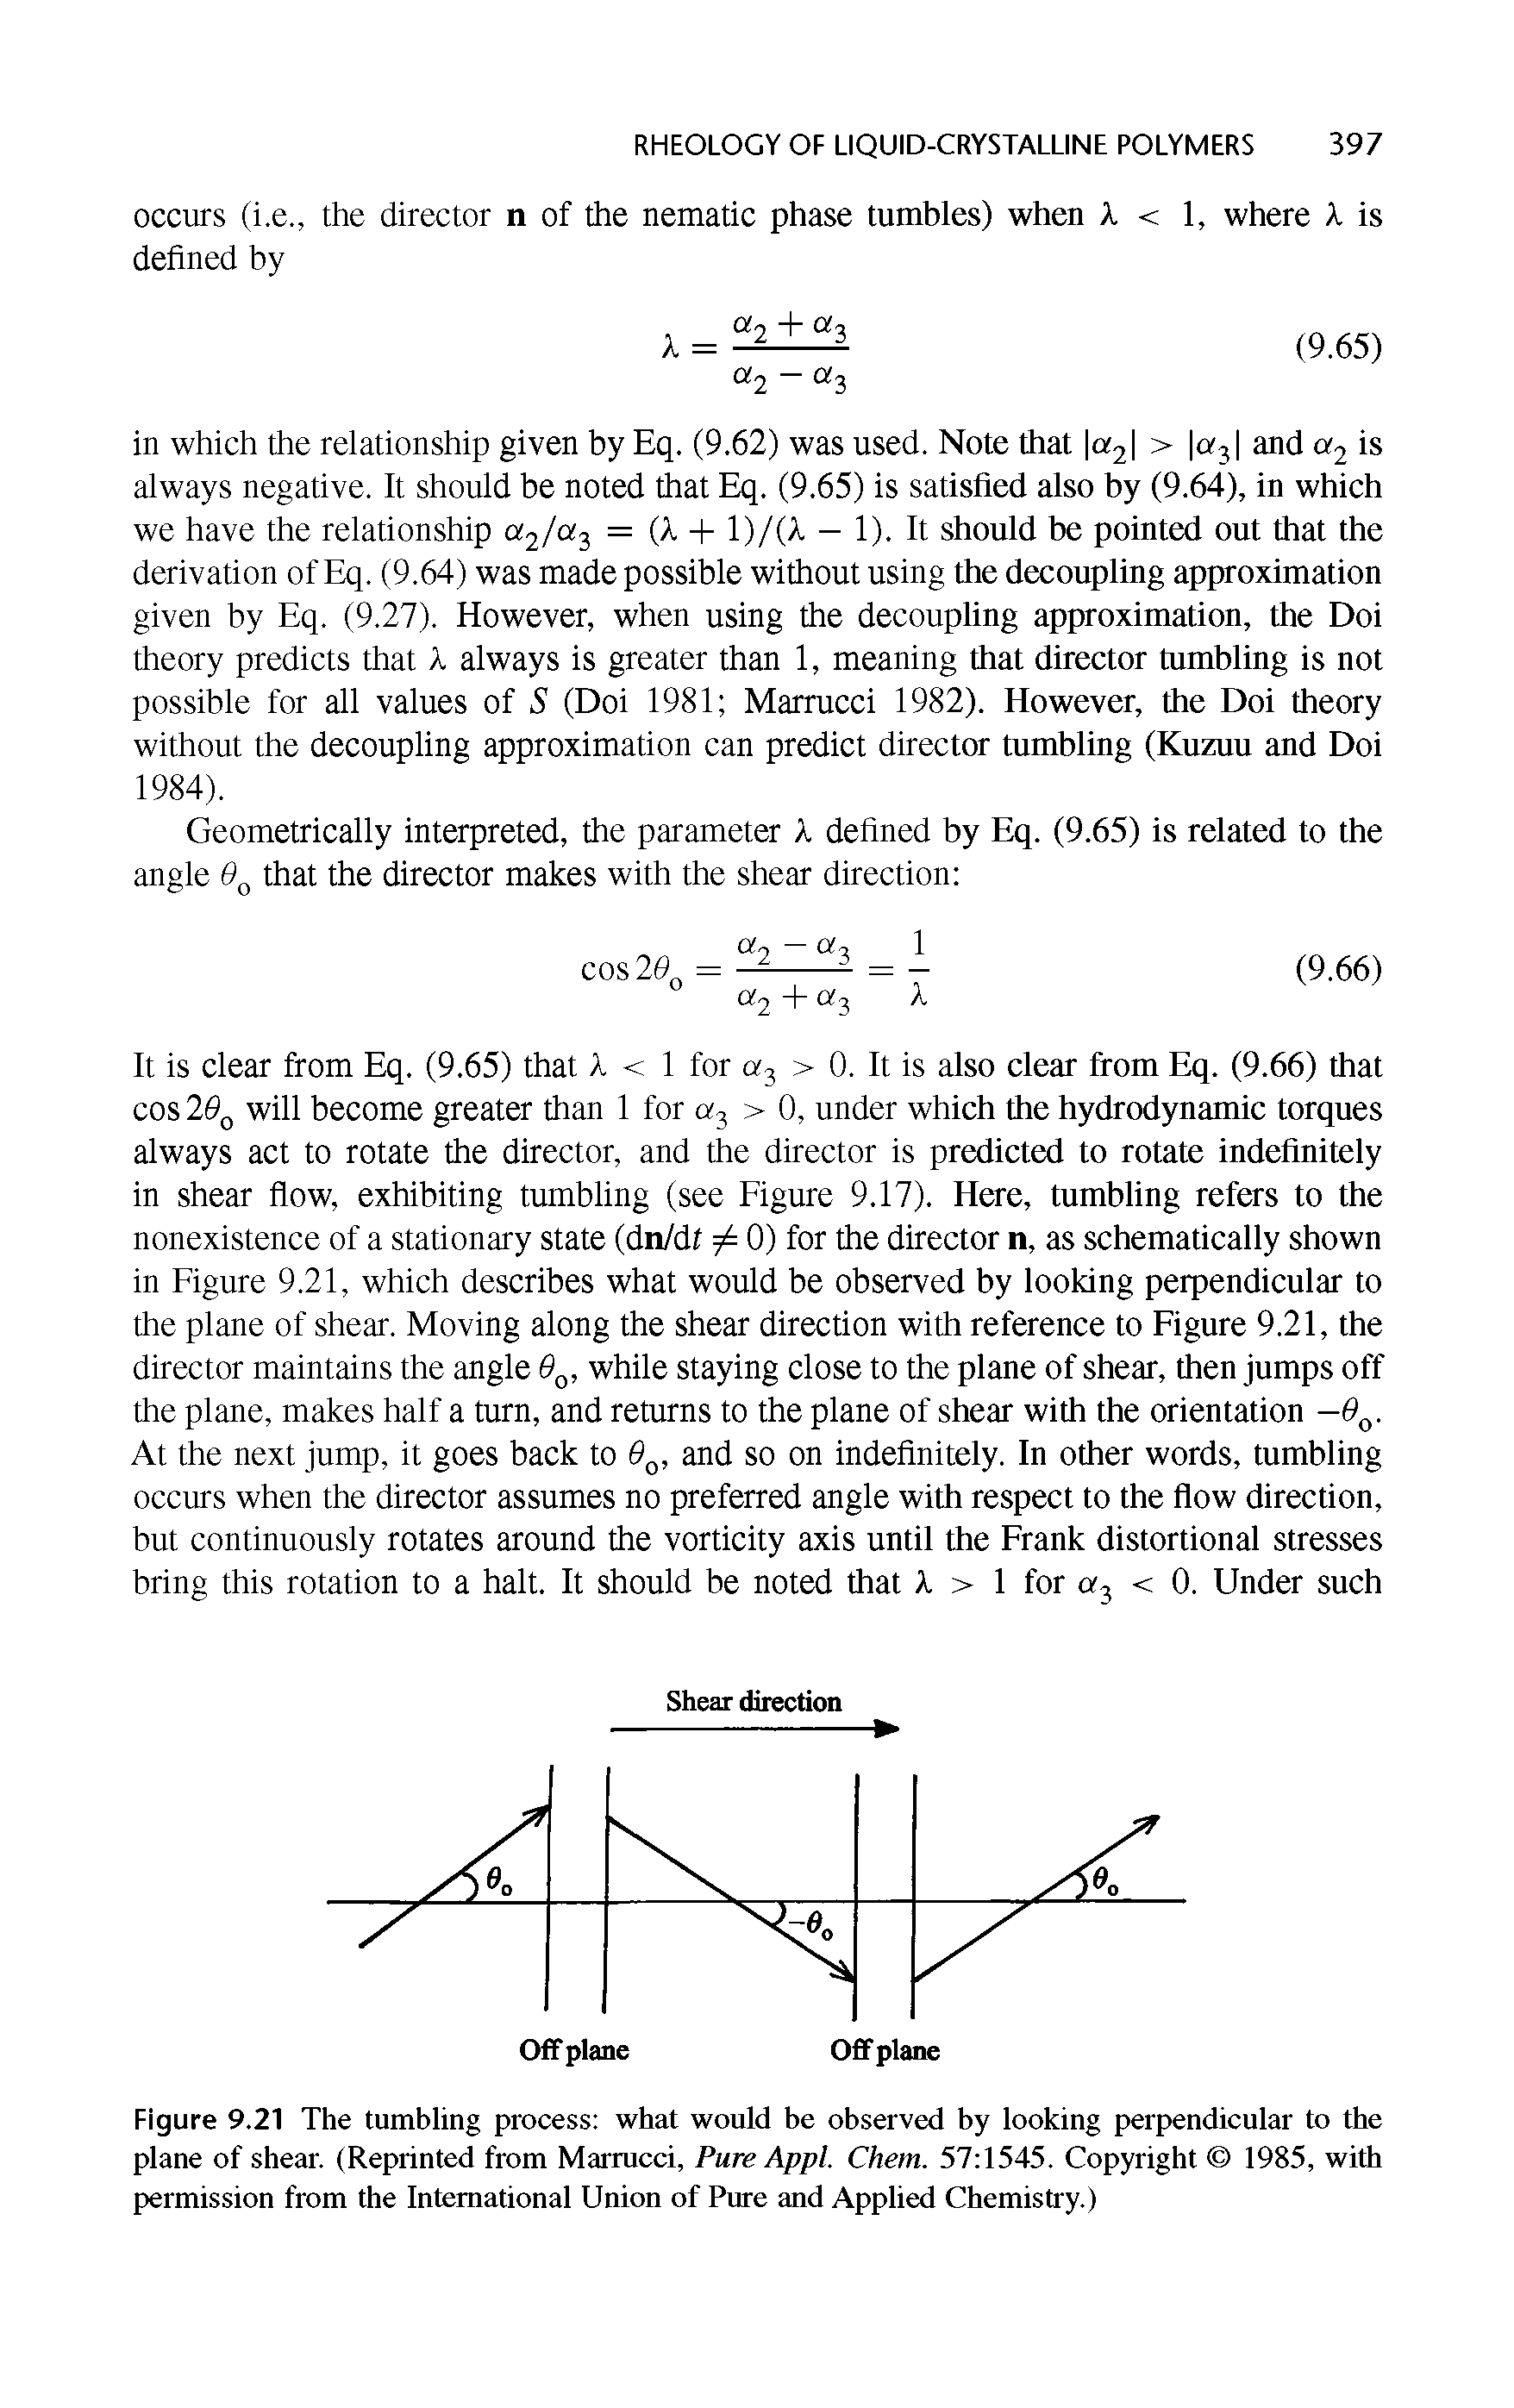 Figure 9.21 The tumbling process what would be observed by looking perpendicular to the plane of shear. (Reprinted from Marrucci, Pure Appl. Chem. 57 1545. Copyright 1985, with permission from the International Union of Pure and Applied Chemistry.)...